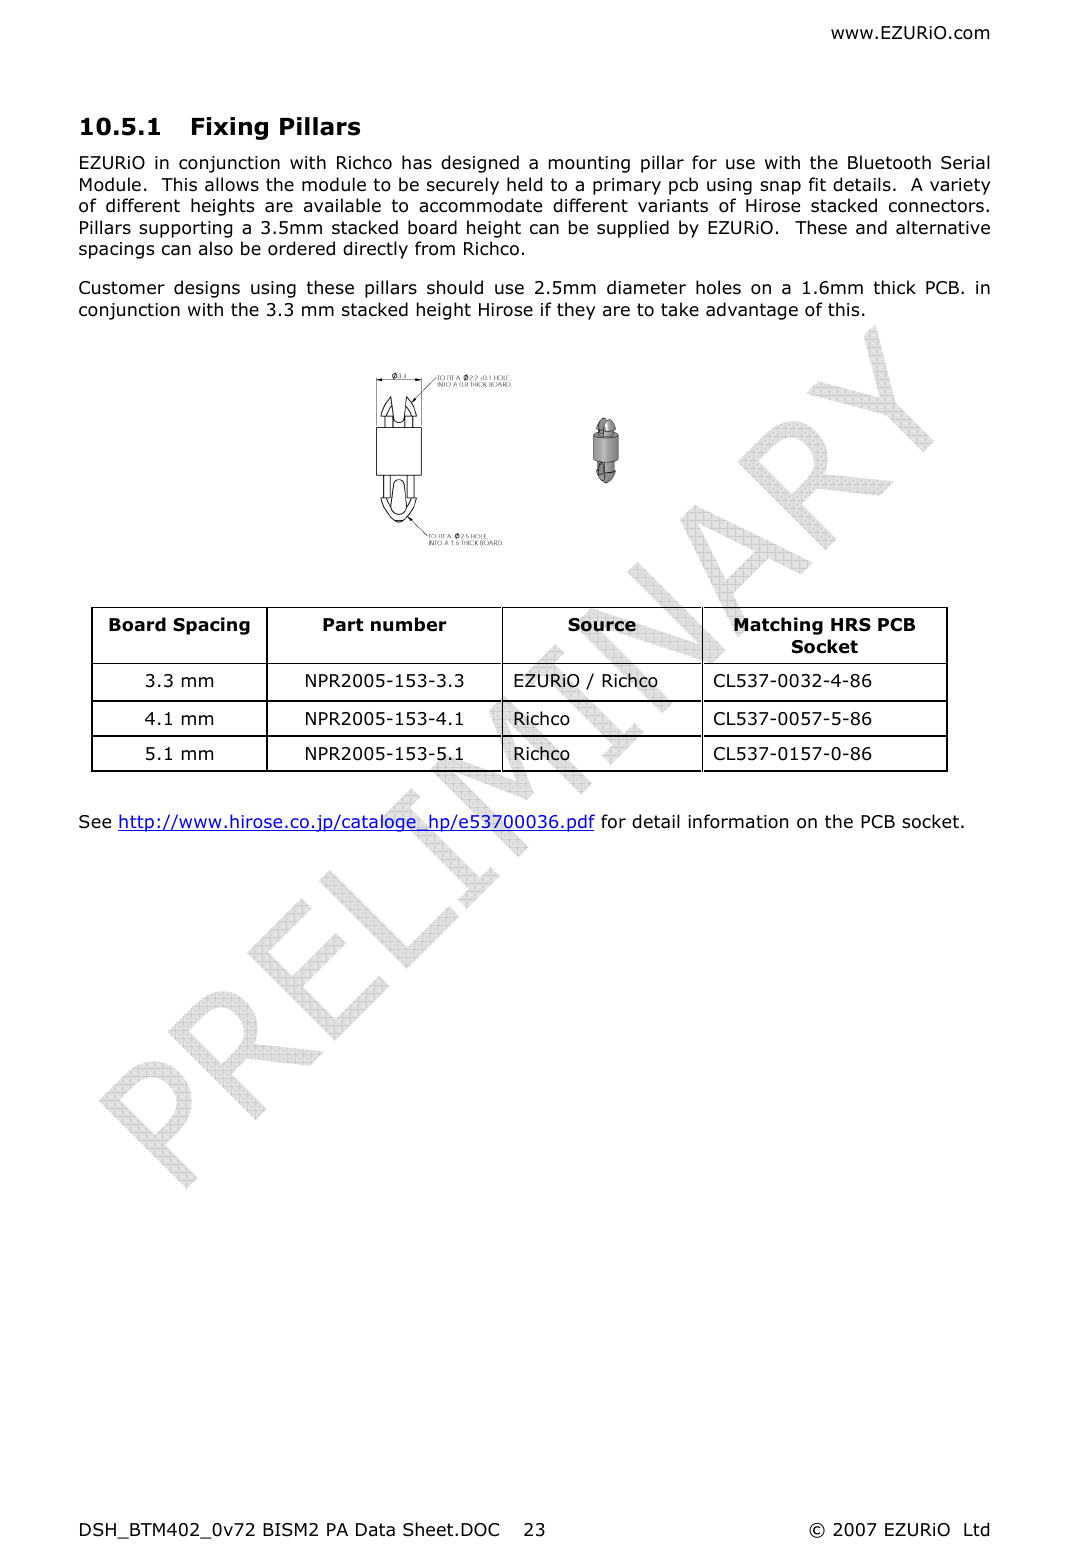 www.EZURiO.com DSH_BTM402_0v72 BISM2 PA Data Sheet.DOC  © 2007 EZURiO  Ltd  23 10.5.1 Fixing Pillars   EZURiO  in  conjunction  with  Richco  has  designed a mounting pillar for use with the  Bluetooth Serial Module.  This allows the module to be securely held to a primary pcb using snap fit details.  A variety of  different  heights  are  available  to  accommodate  different  variants  of  Hirose  stacked  connectors.  Pillars supporting a 3.5mm stacked board height can be supplied by EZURiO.  These and alternative spacings can also be ordered directly from Richco. Customer  designs  using  these  pillars  should  use  2.5mm  diameter  holes  on  a  1.6mm  thick  PCB.  in conjunction with the 3.3 mm stacked height Hirose if they are to take advantage of this.           See http://www.hirose.co.jp/cataloge_hp/e53700036.pdf for detail information on the PCB socket.         Board Spacing  Part number  Source   Matching HRS PCB Socket 3.3 mm  NPR2005-153-3.3  EZURiO / Richco  CL537-0032-4-86 4.1 mm  NPR2005-153-4.1  Richco  CL537-0057-5-86  5.1 mm  NPR2005-153-5.1  Richco   CL537-0157-0-86 